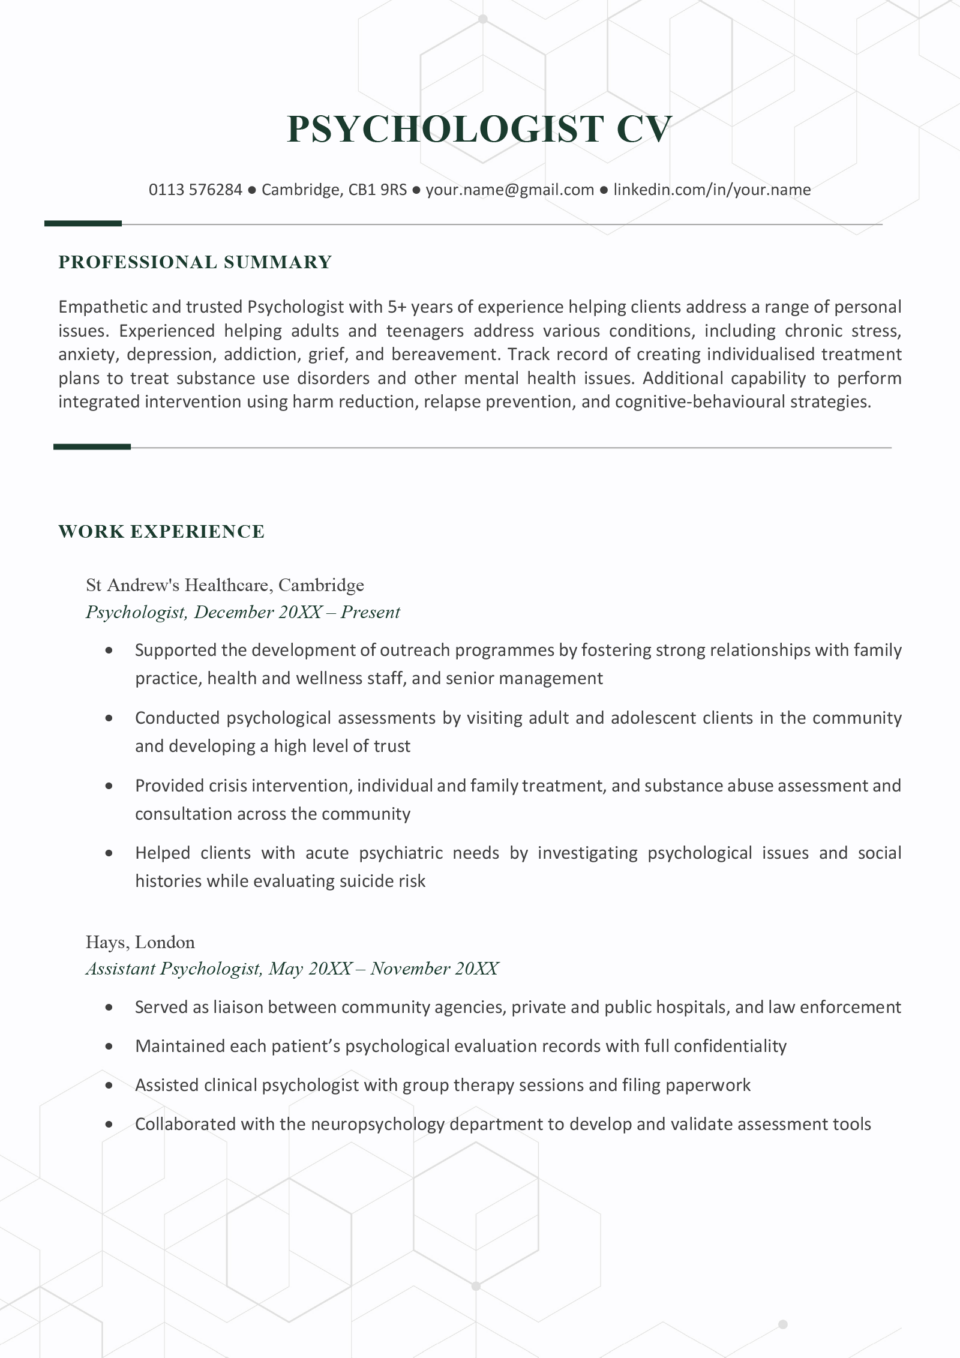 A psychologist CV example with a formal green header and geometric graphic design, as well as two CV sections that outline the applicant's experience.